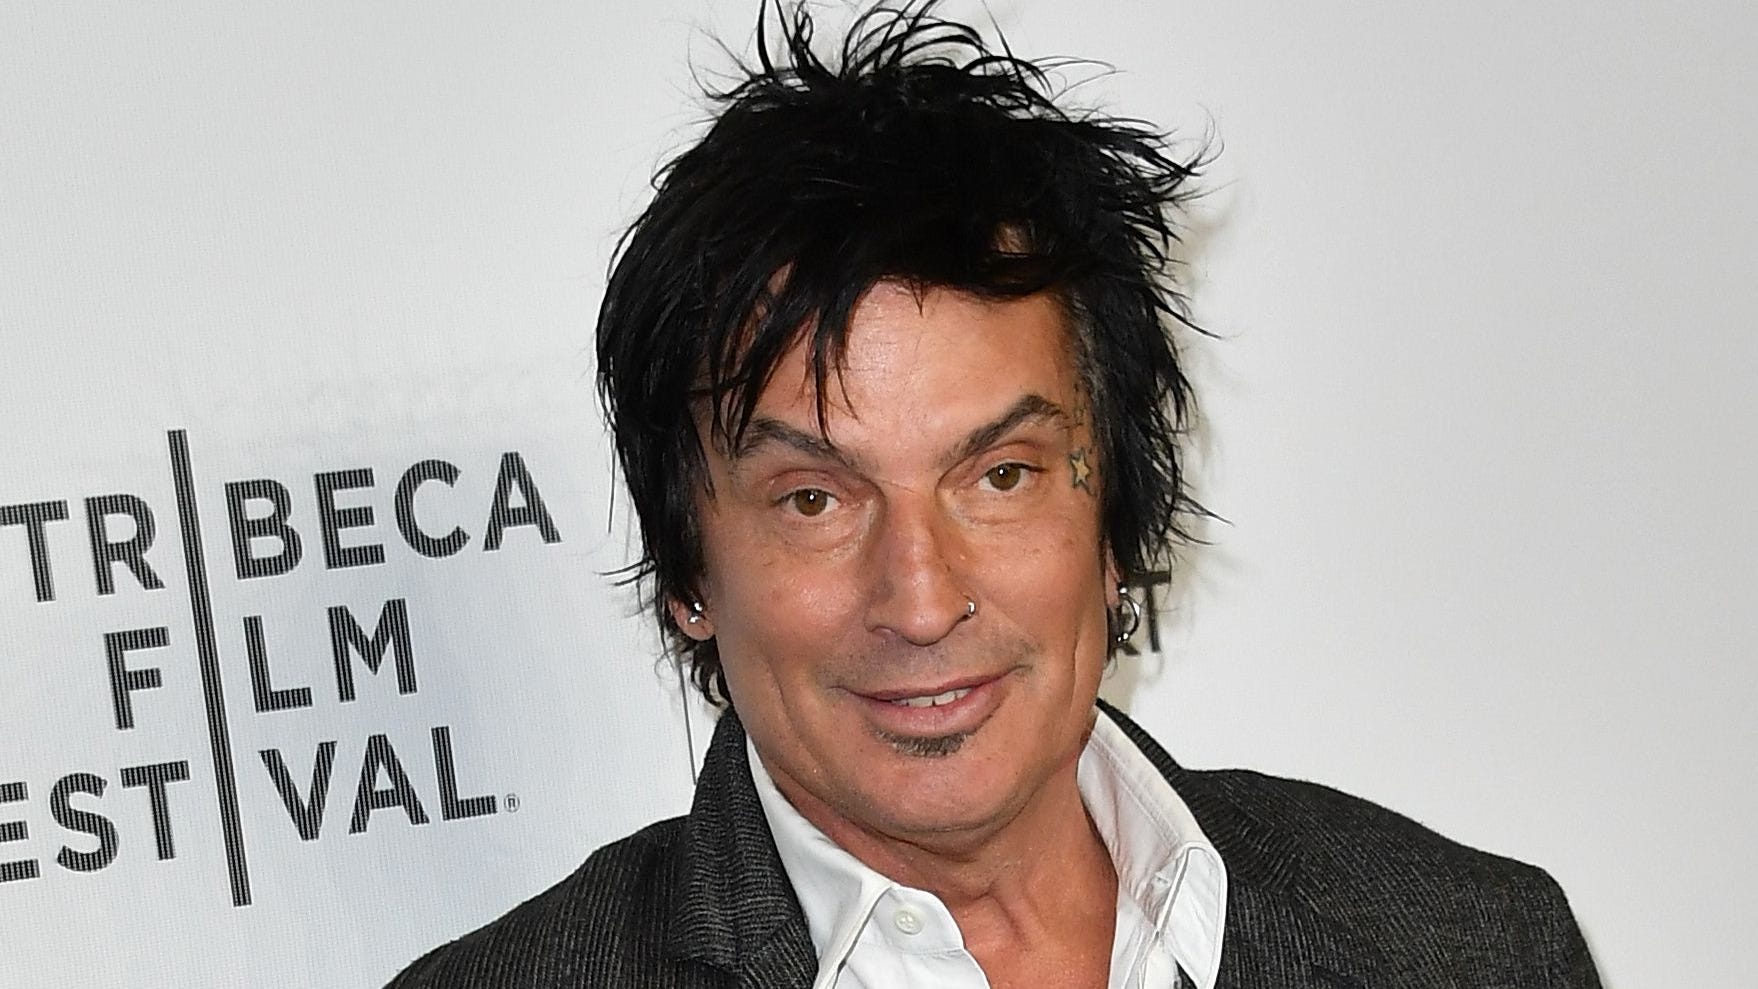 Trump supporters skewered by Tommy Lee on Twitter